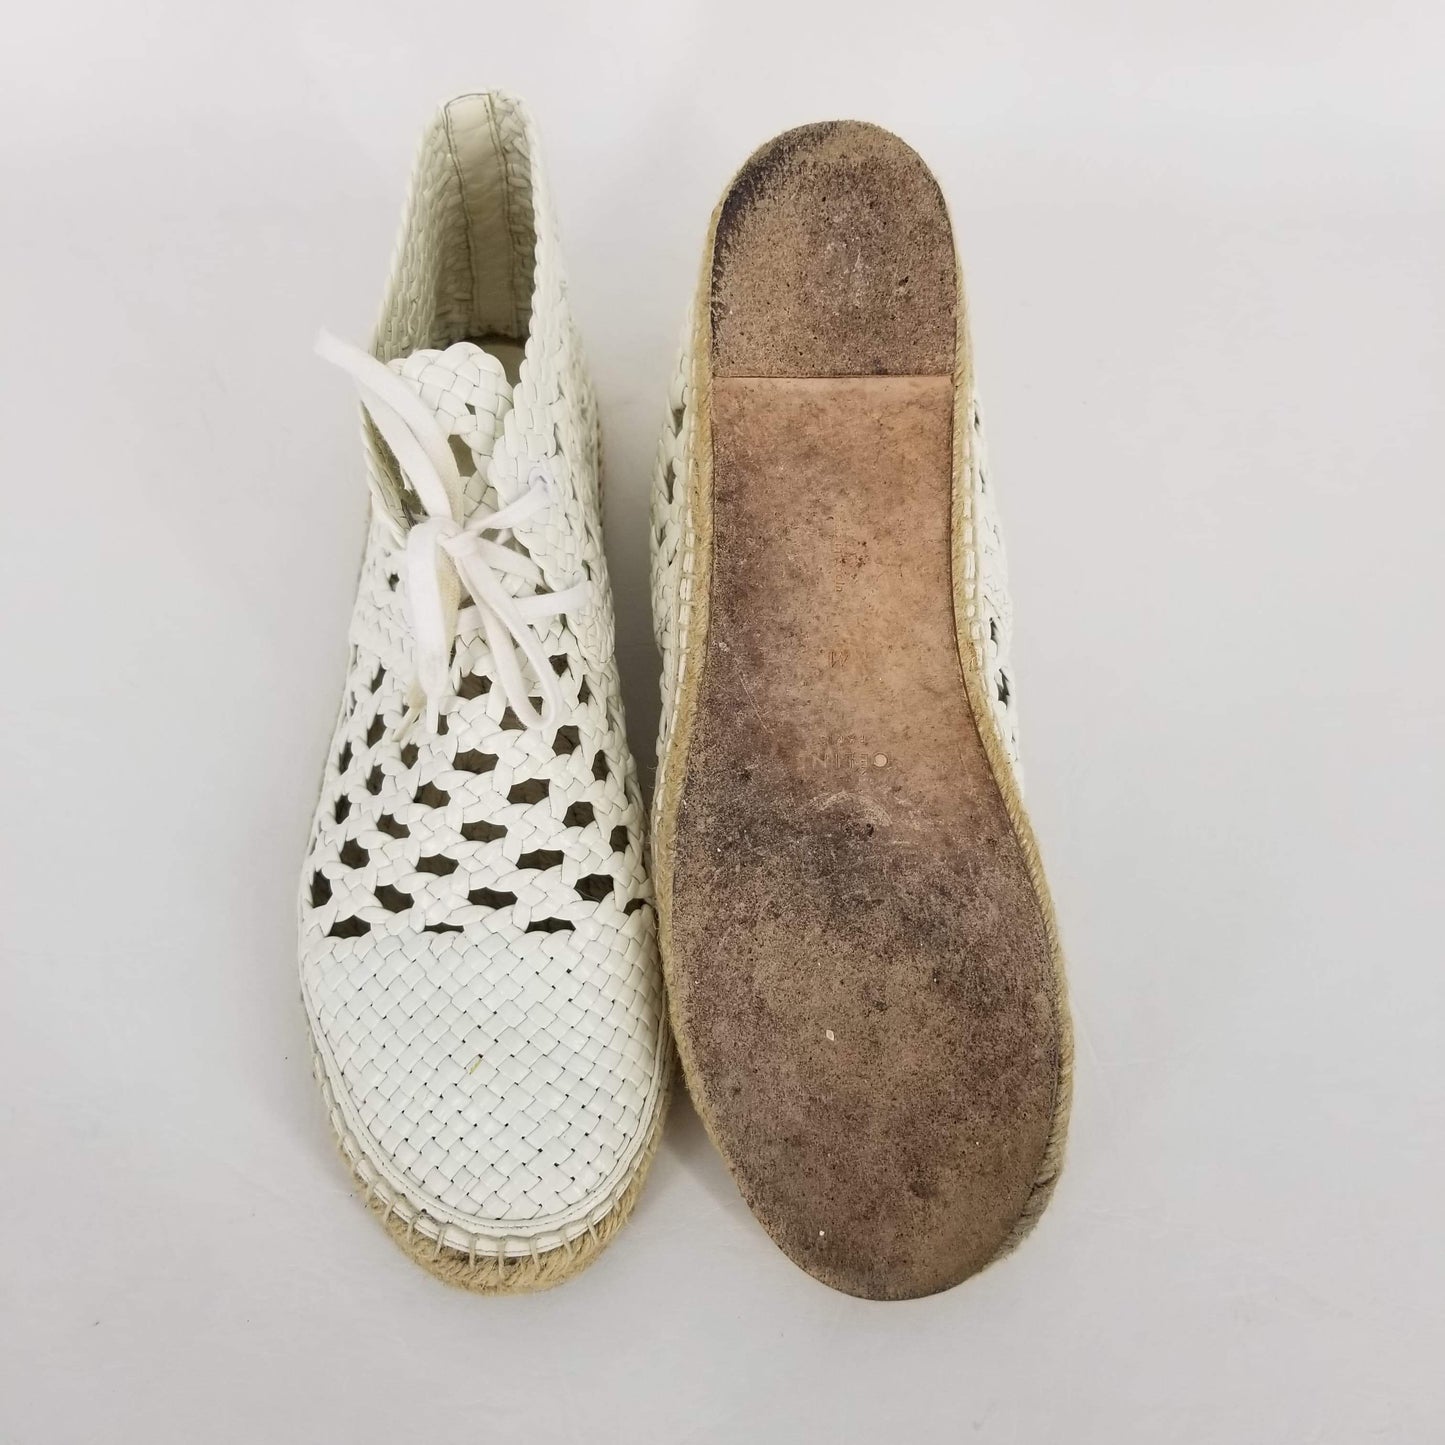 Authentic Celine Ivory Woven Leather Lace-ups